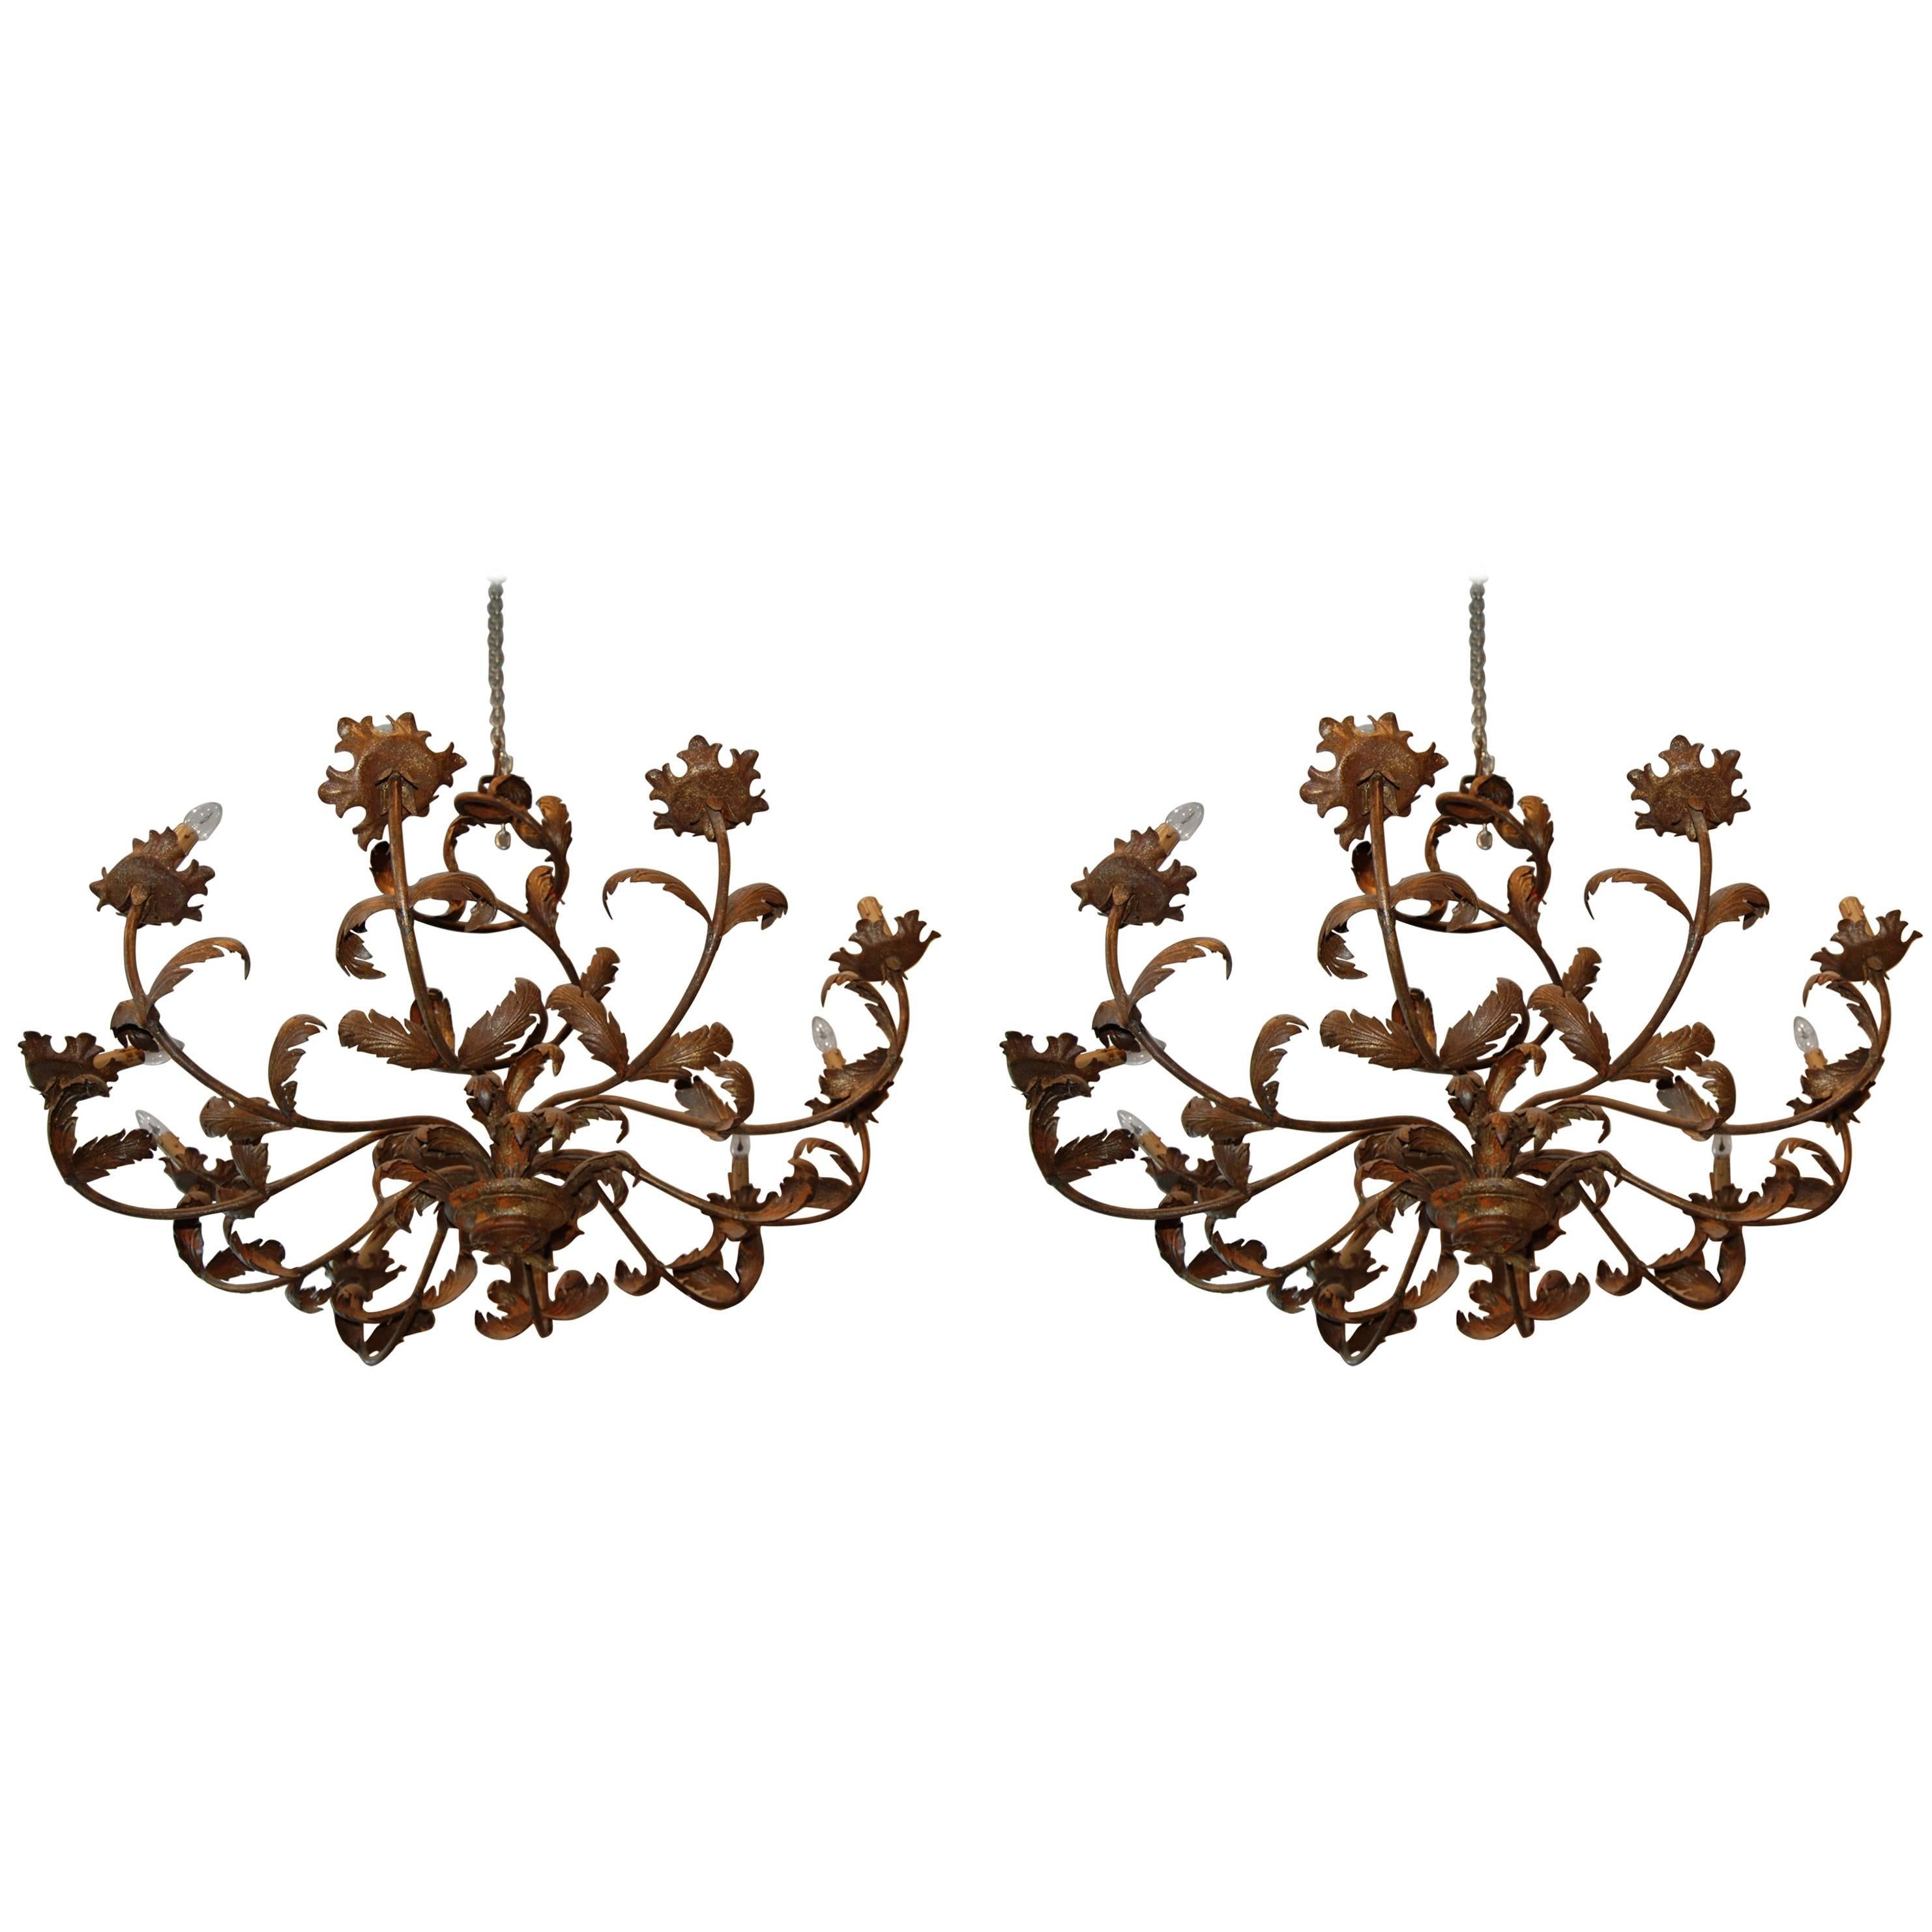 Pair of Belle Epoch Iron Chandeliers